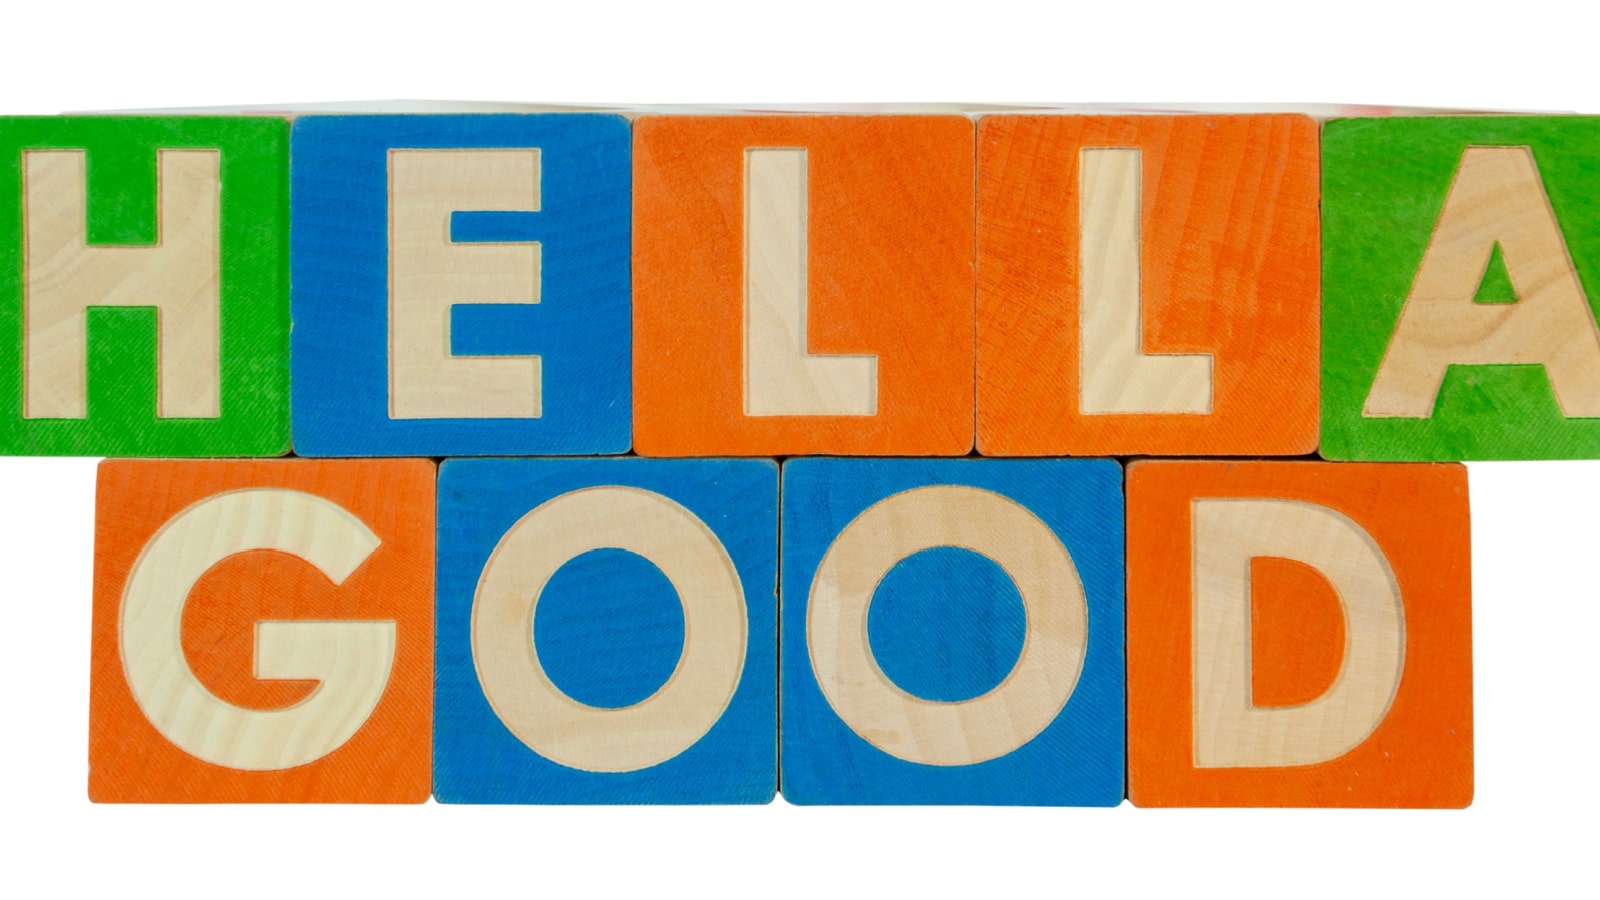 HELLA GOOD concept spelled out with toy blocks. HELLA GOOD means very or extremely good.